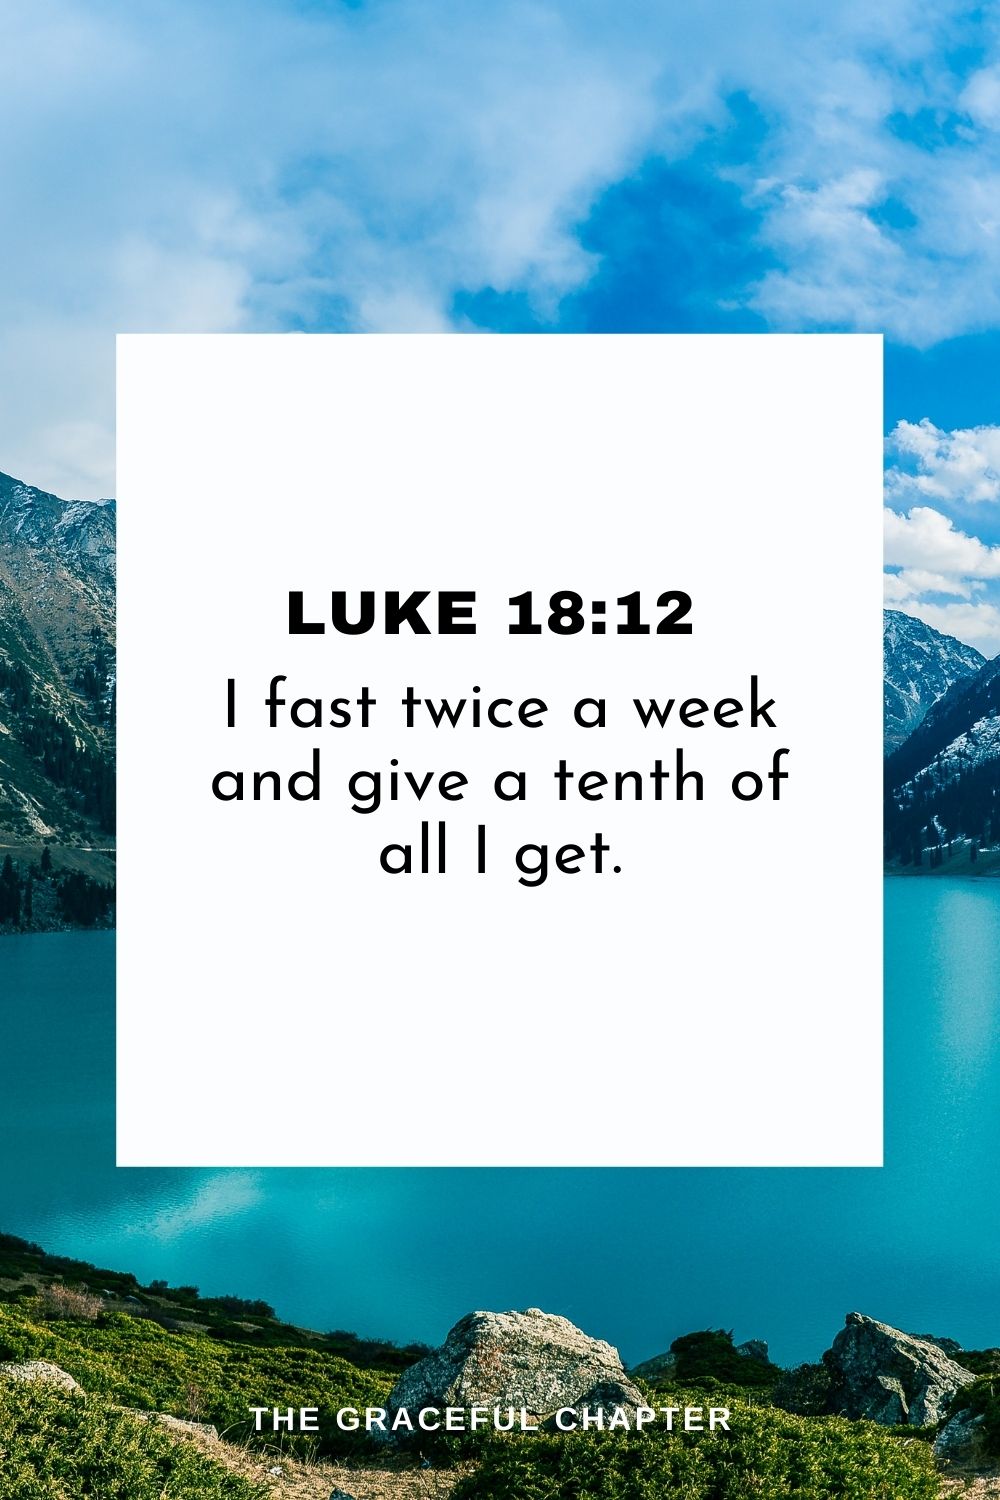 I fast twice a week and give a tenth of all I get. Luke 18:12